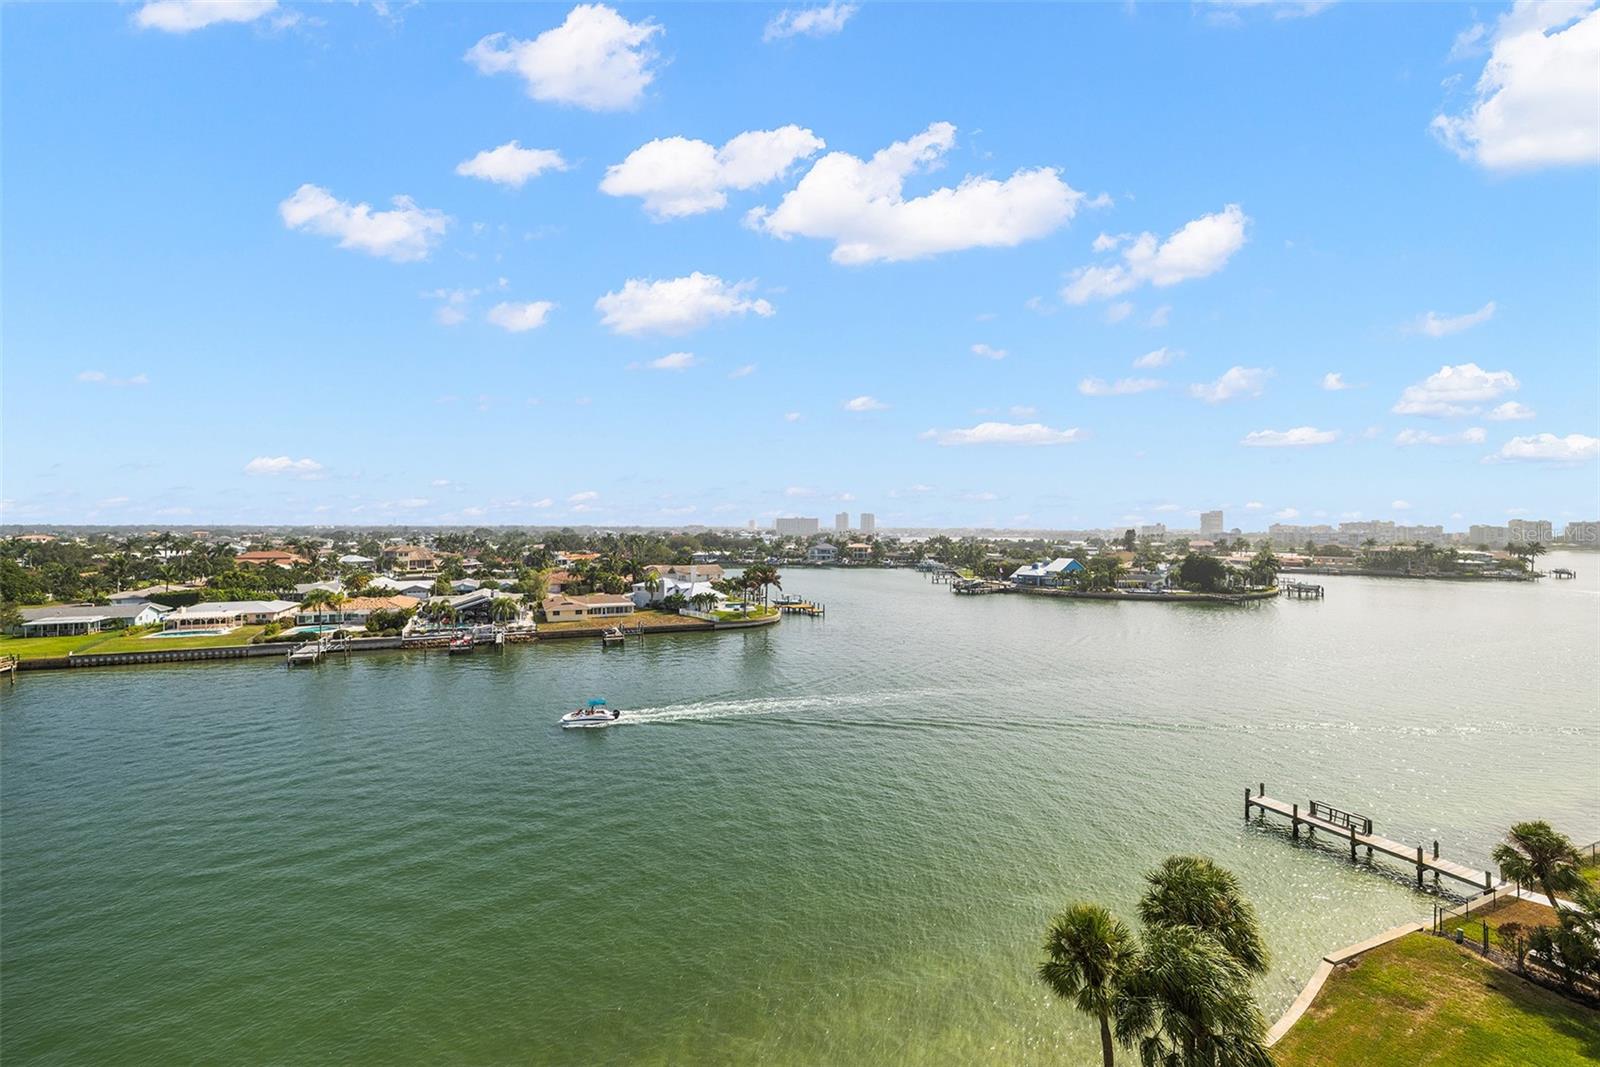 Your view is of the Intracoastal waterway and even some of St Pete